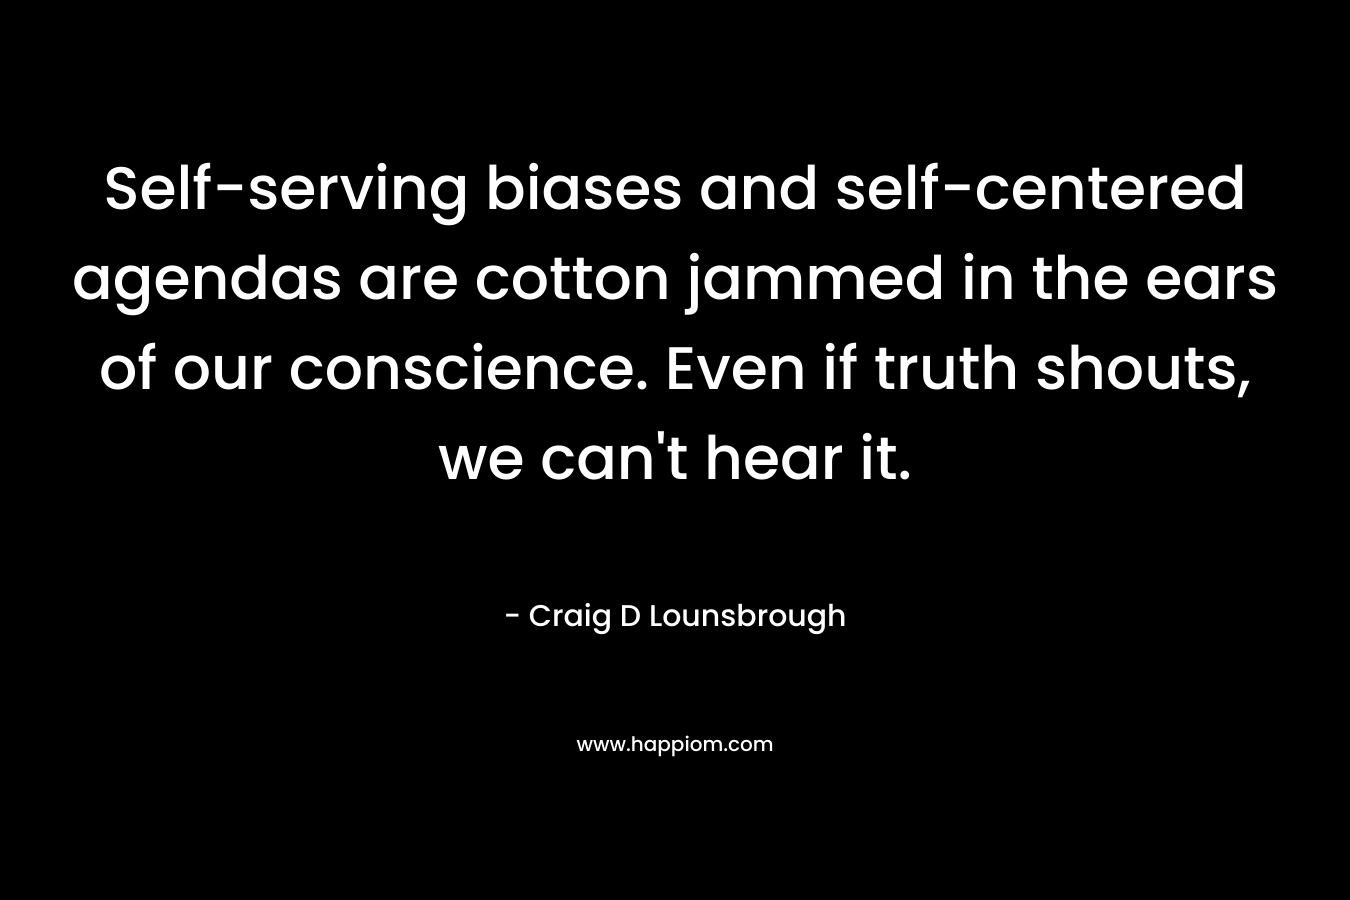 Self-serving biases and self-centered agendas are cotton jammed in the ears of our conscience. Even if truth shouts, we can’t hear it. – Craig D Lounsbrough